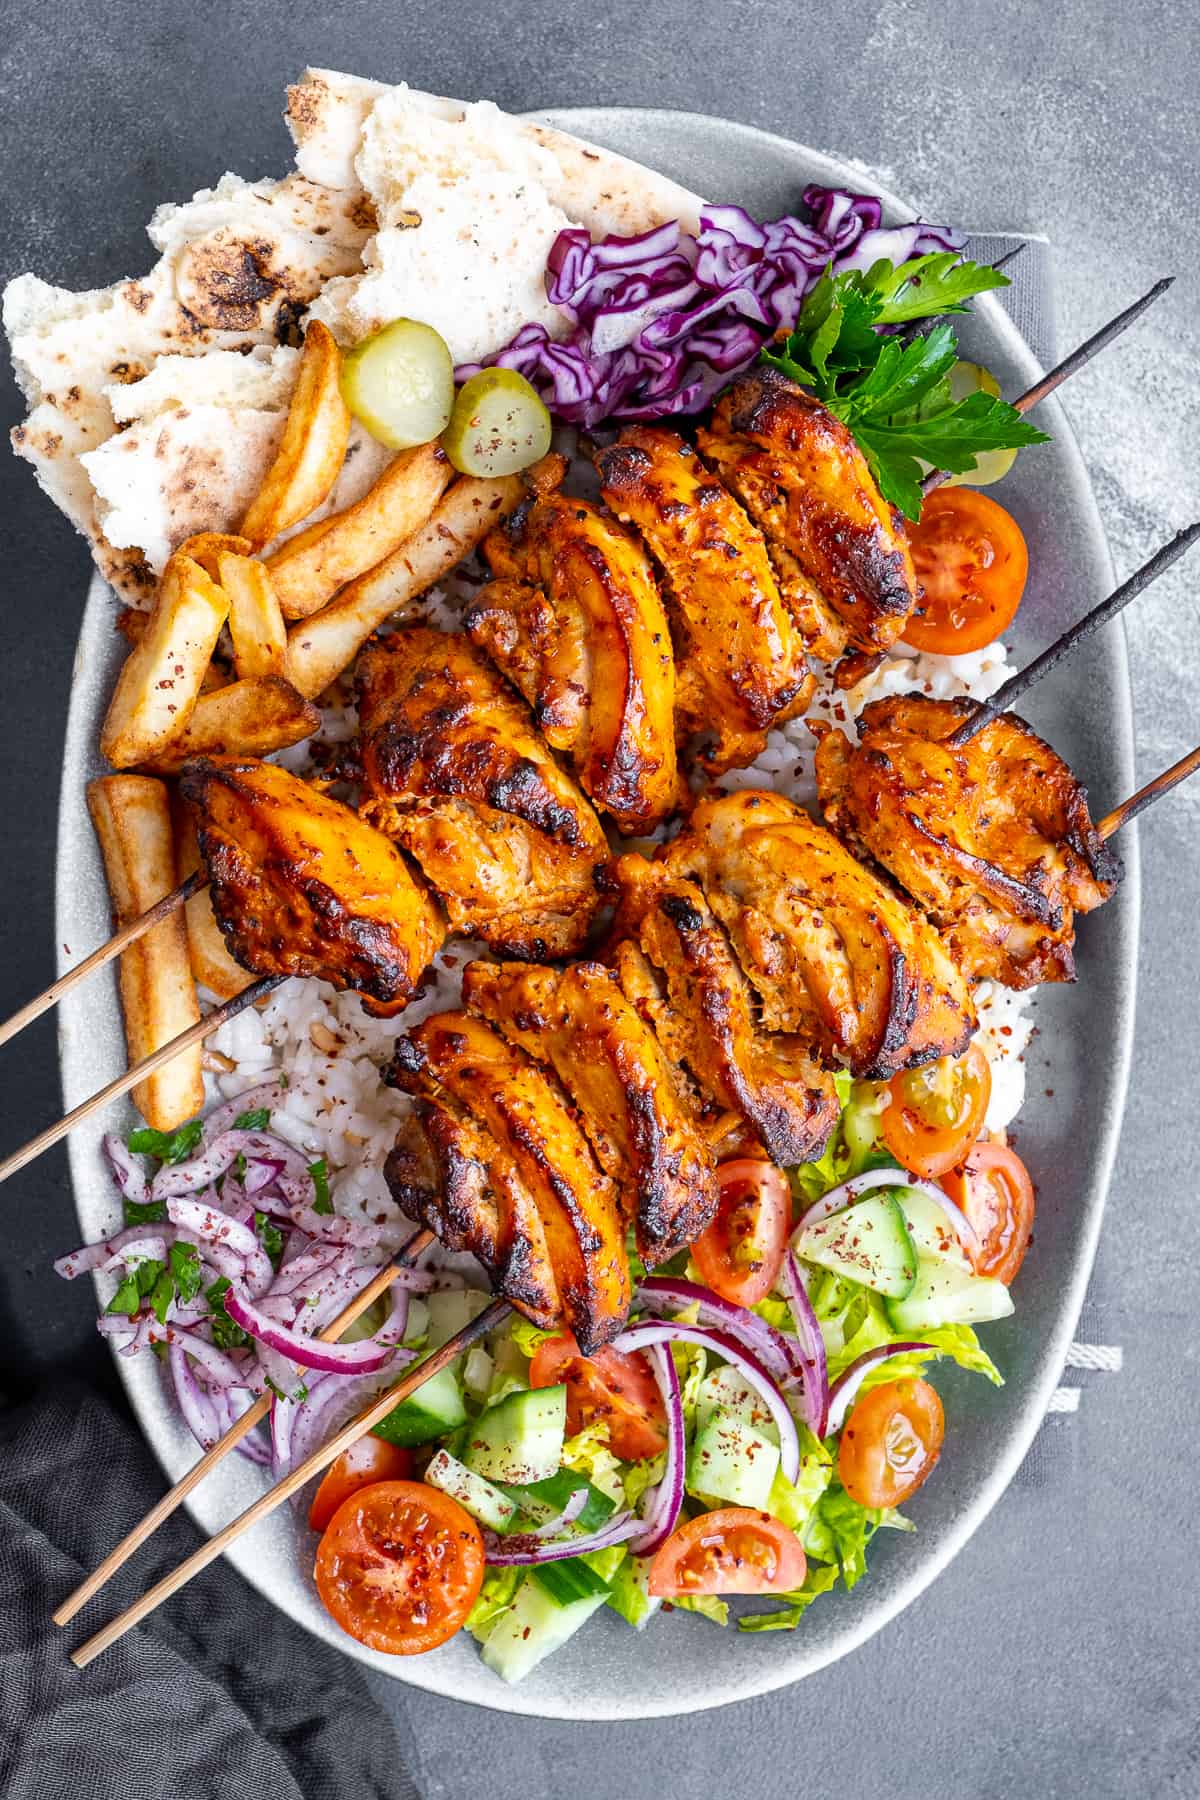 Chicken doner kebab skewers accompanied by rice, salad, pickles and French fries on the same oval plate.